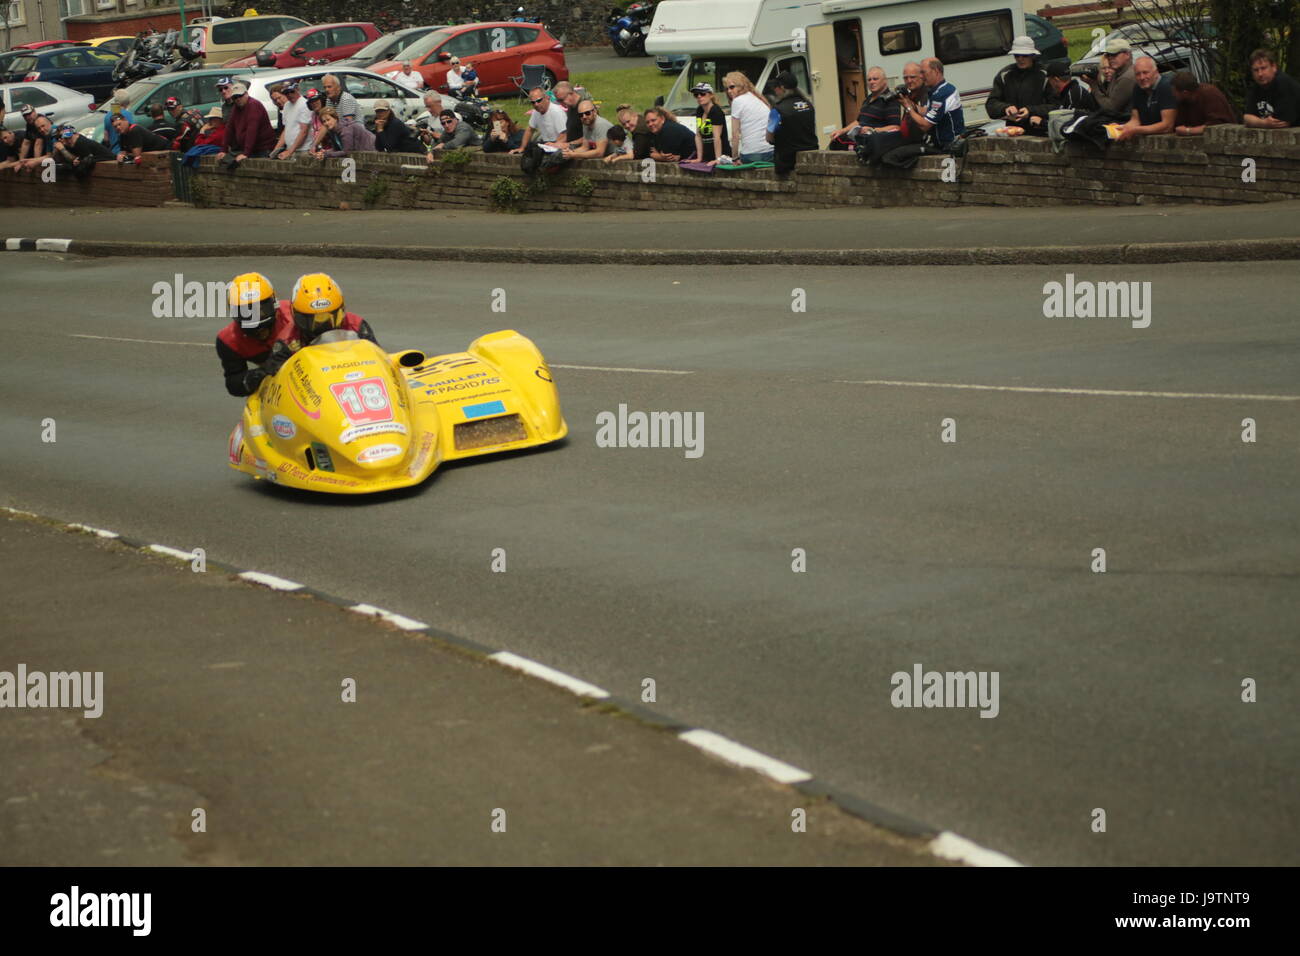 Isle of Man TT Races, Sidecar Qualifying Practice Race, Saturday 3 June 2017. Sidecar qualifying session. Number  18, Gordon Shand and Philip Hyde on their 600cc Shand Honda sidecar of the Kevin Ashworth Machined Timber team from Kilwinning.  Credit: Eclectic Art and Photography/Alamy Live News. Stock Photo